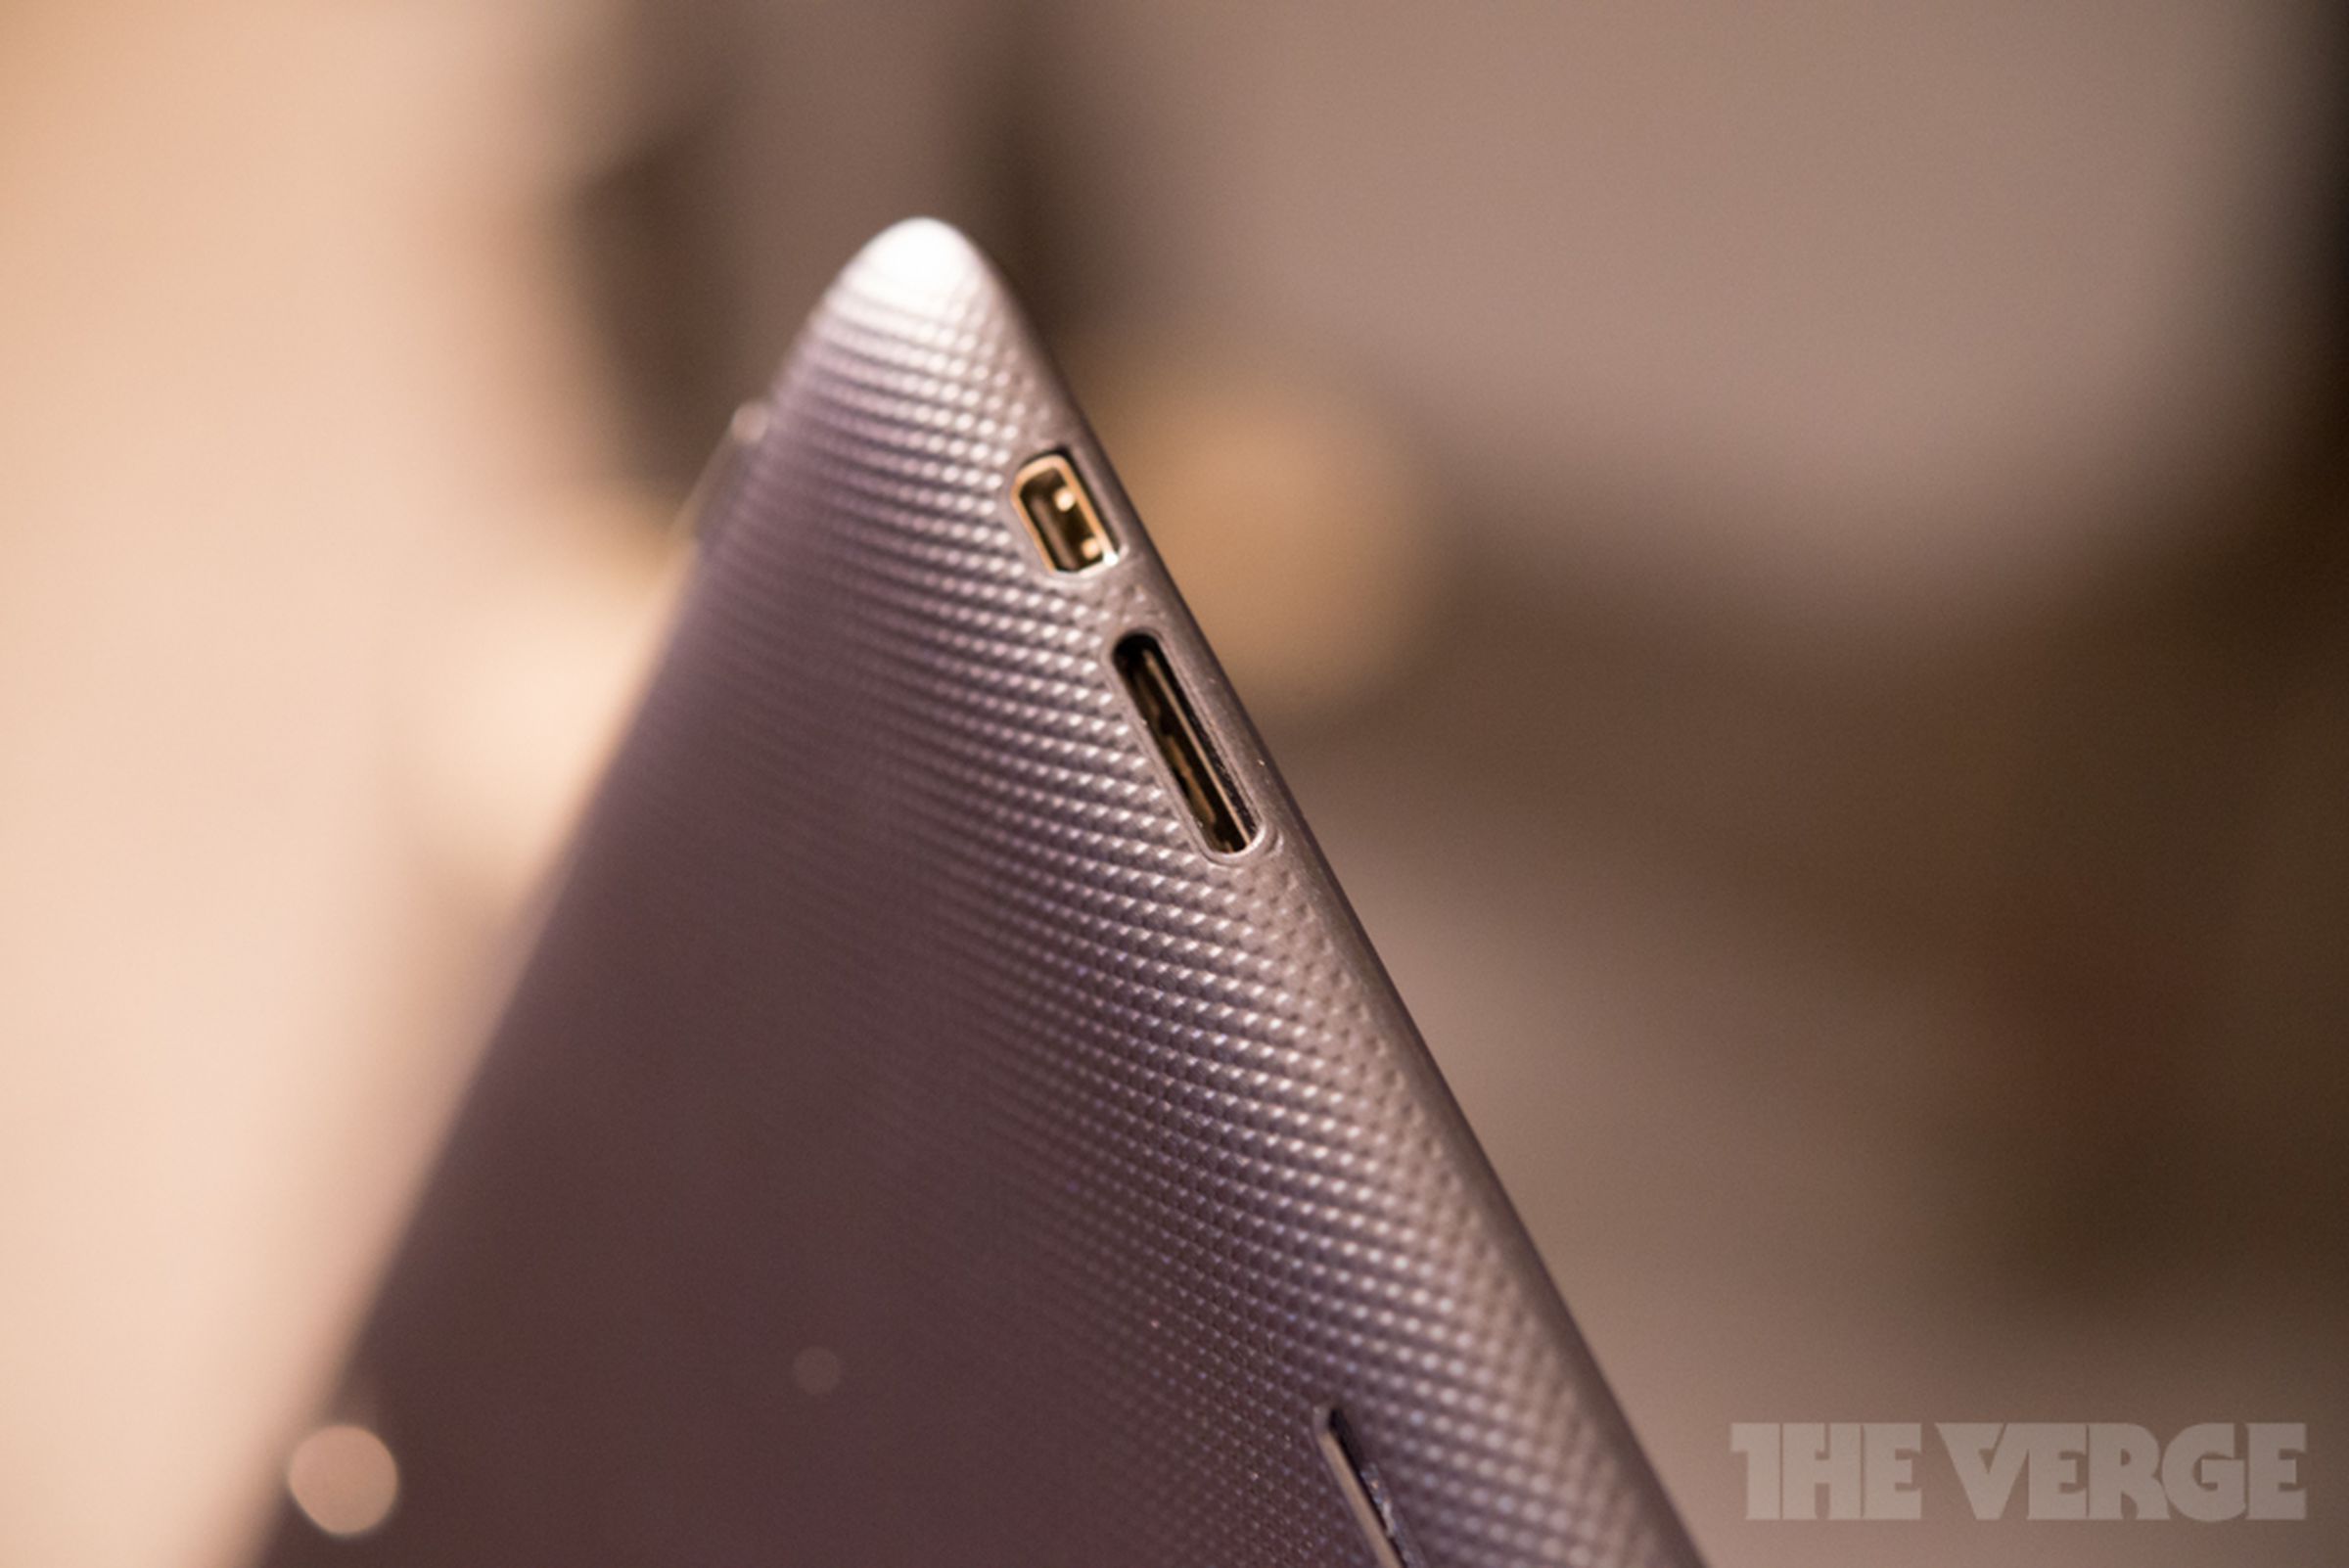 Asus Memo Pad FHD 10 hands-on pictures